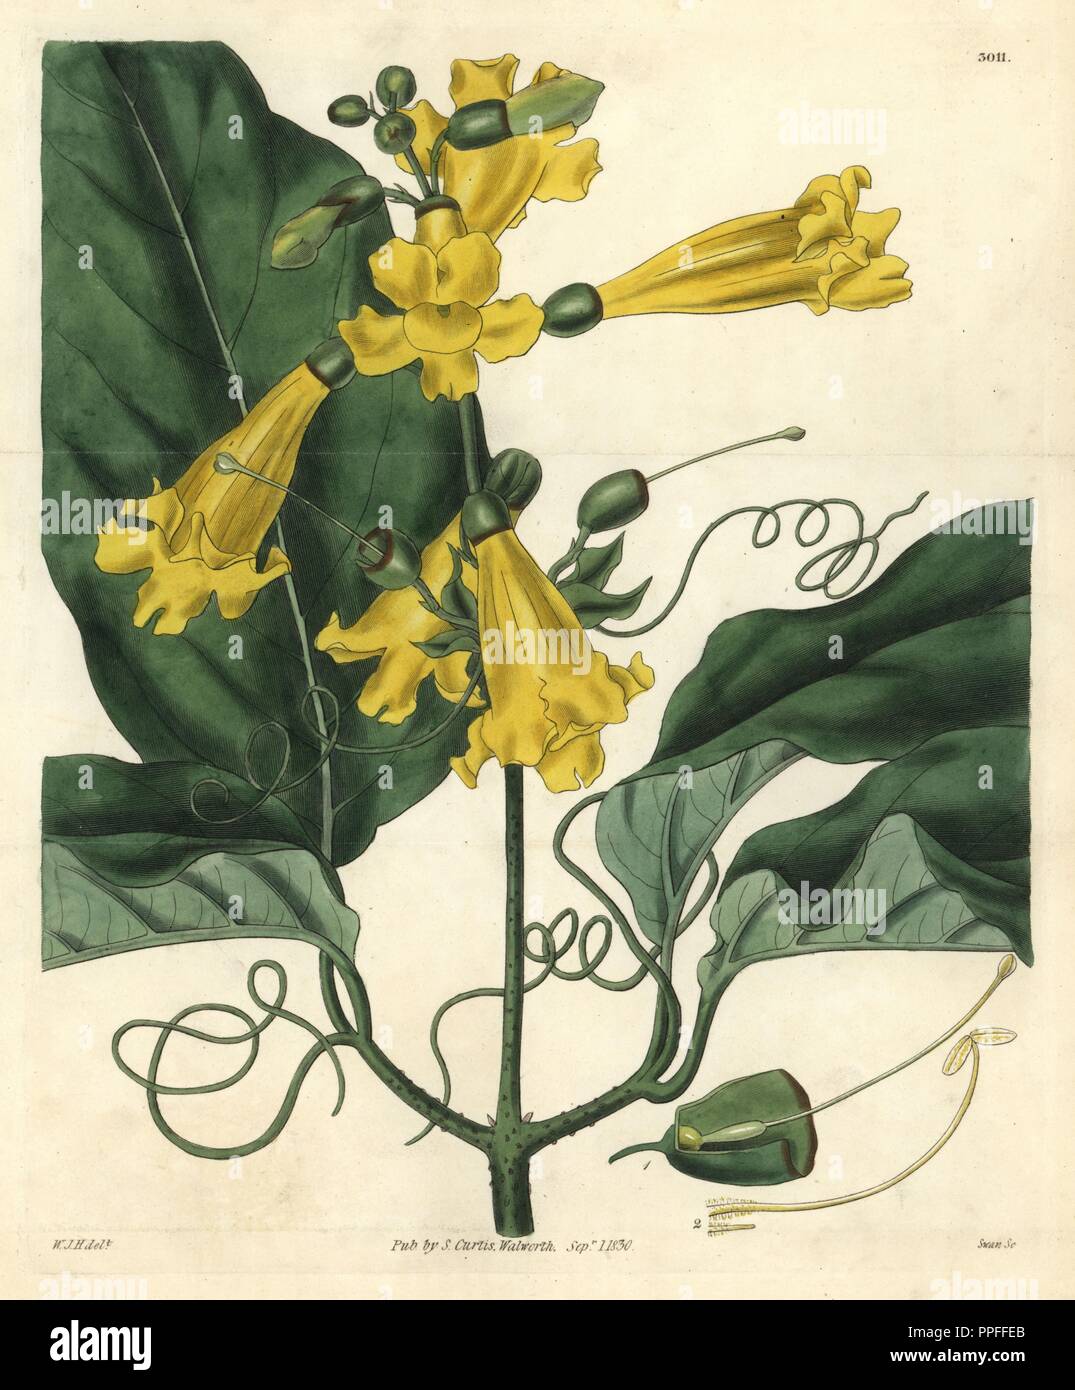 Gigantic-leaved trumpet-flower, Bignonia grandiflora. Illustration drawn by William Jackson Hooker, engraved by Swan. Handcolored copperplate engraving from William Curtis's 'The Botanical Magazine,' Samuel Curtis, 1830. Hooker (1785-1865) was an English botanist, writer and artist. He was Regius Professor of Botany at Glasgow University, and editor of Curtis' 'Botanical Magazine' from 1827 to 1865. In 1841, he was appointed director of the Royal Botanic Gardens at Kew, and was succeeded by his son Joseph Dalton. Hooker documented the fern and orchid crazes that shook England in the mid-19th c Stock Photo